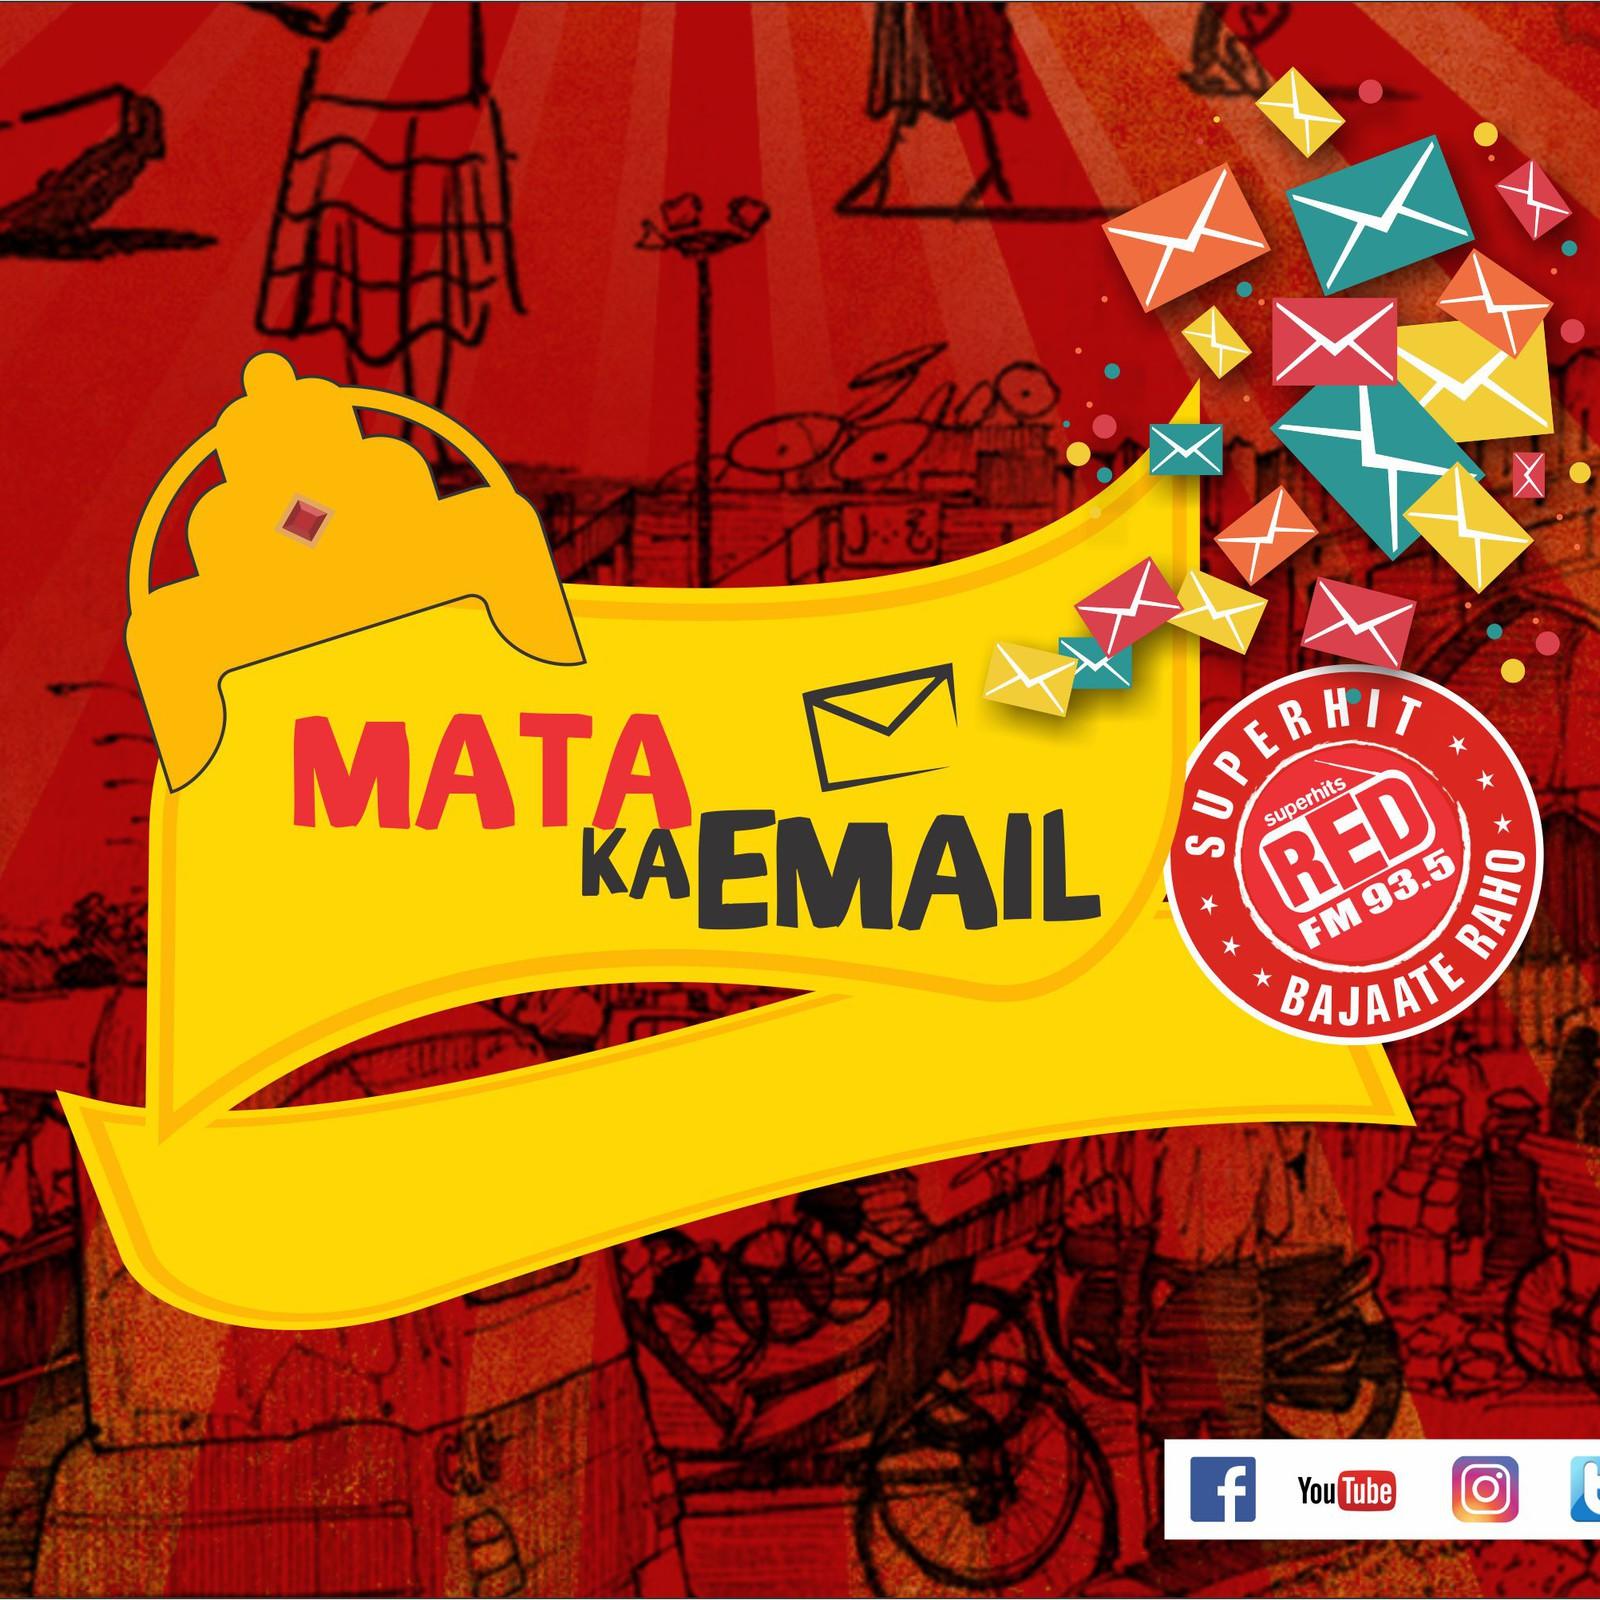 MATA KA EMAIL_ENGINEERS DAY SPECIAL_15 SEP 20